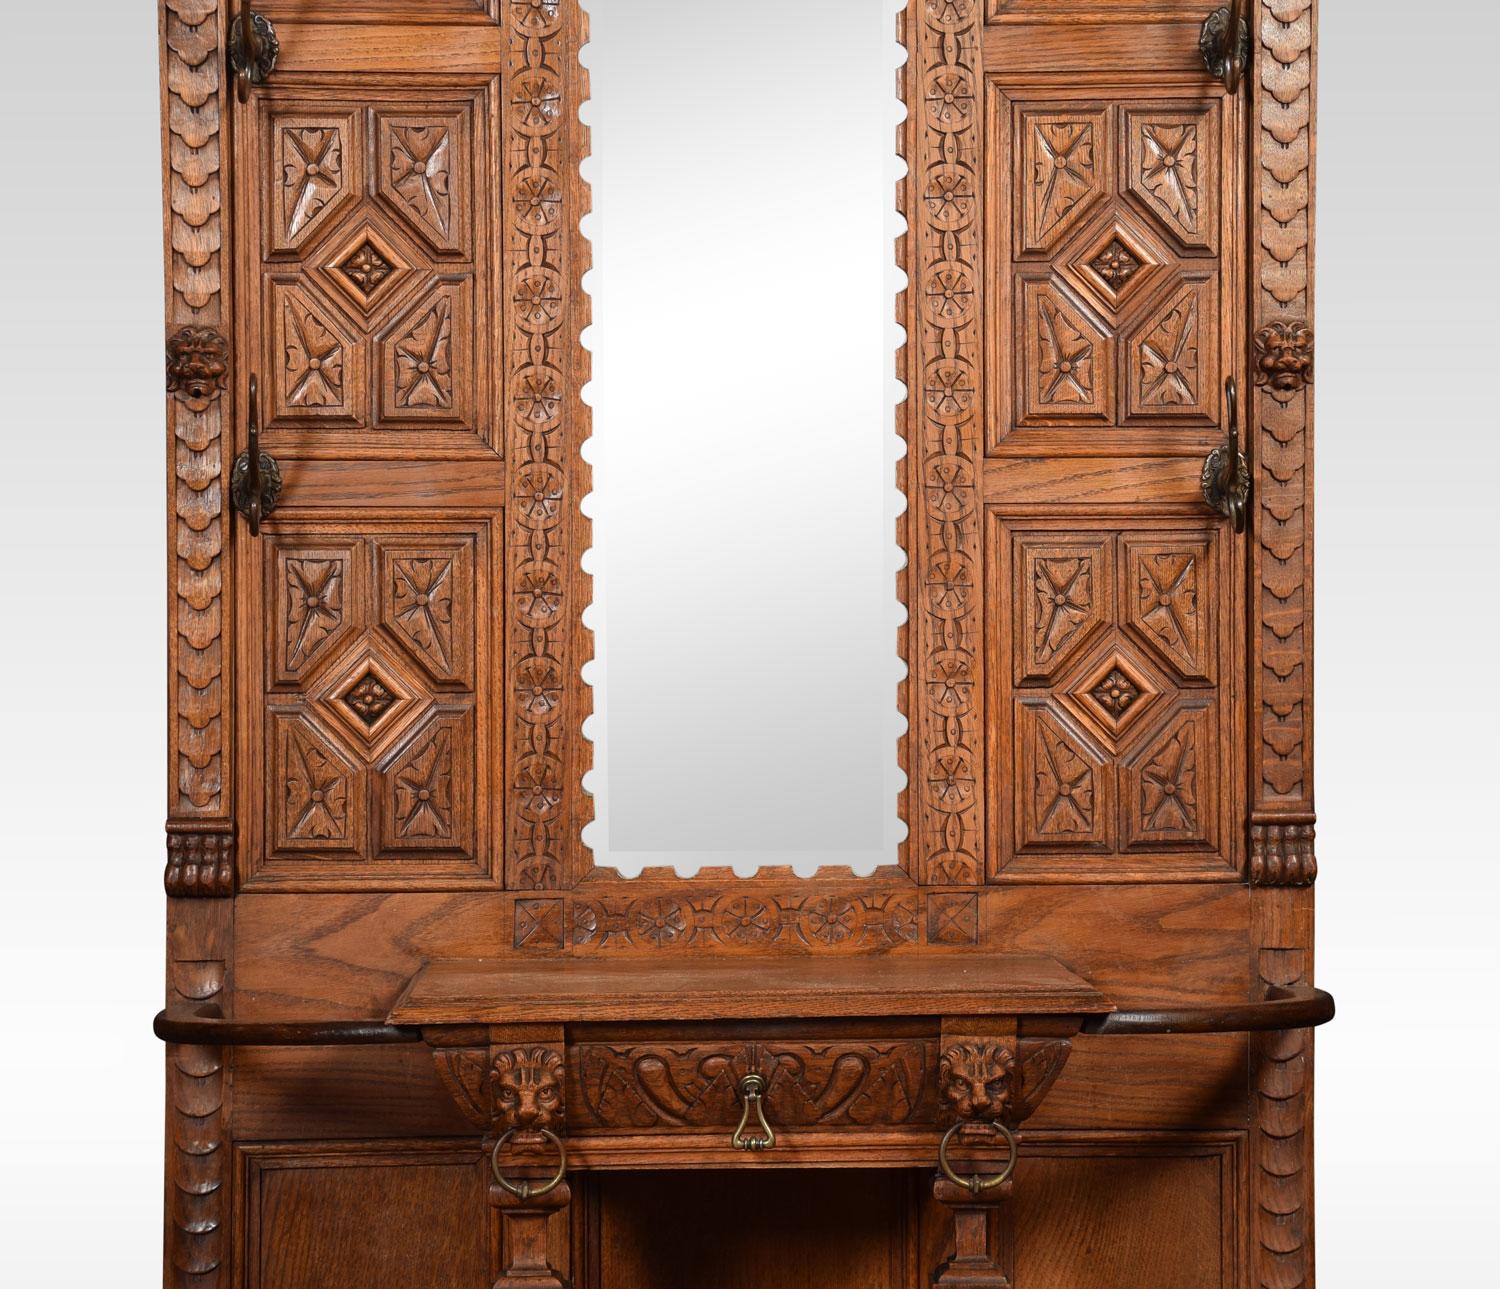 19th century oak hall stand the projecting cornice above original beveled mirror plate. Surrounded by six scrolling hooks. The base section fitted with central draw having umbrella stands to either side with original drip trays. All raised up on bun